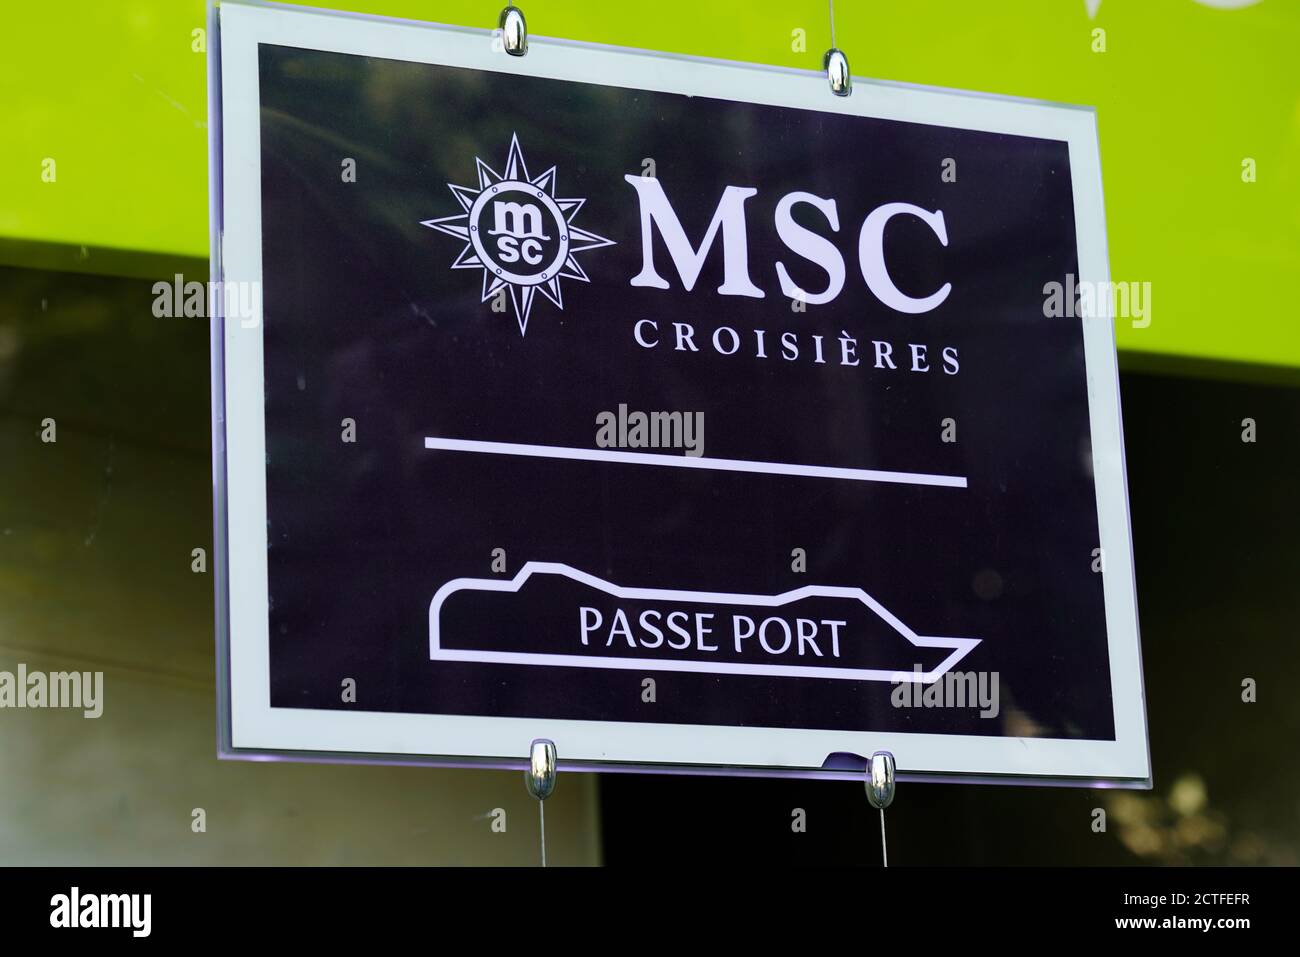 Bordeaux , Aquitaine / France - 09 20 2020 : Msc Croisieres text sign and logo on panel of travel agency Stock Photo